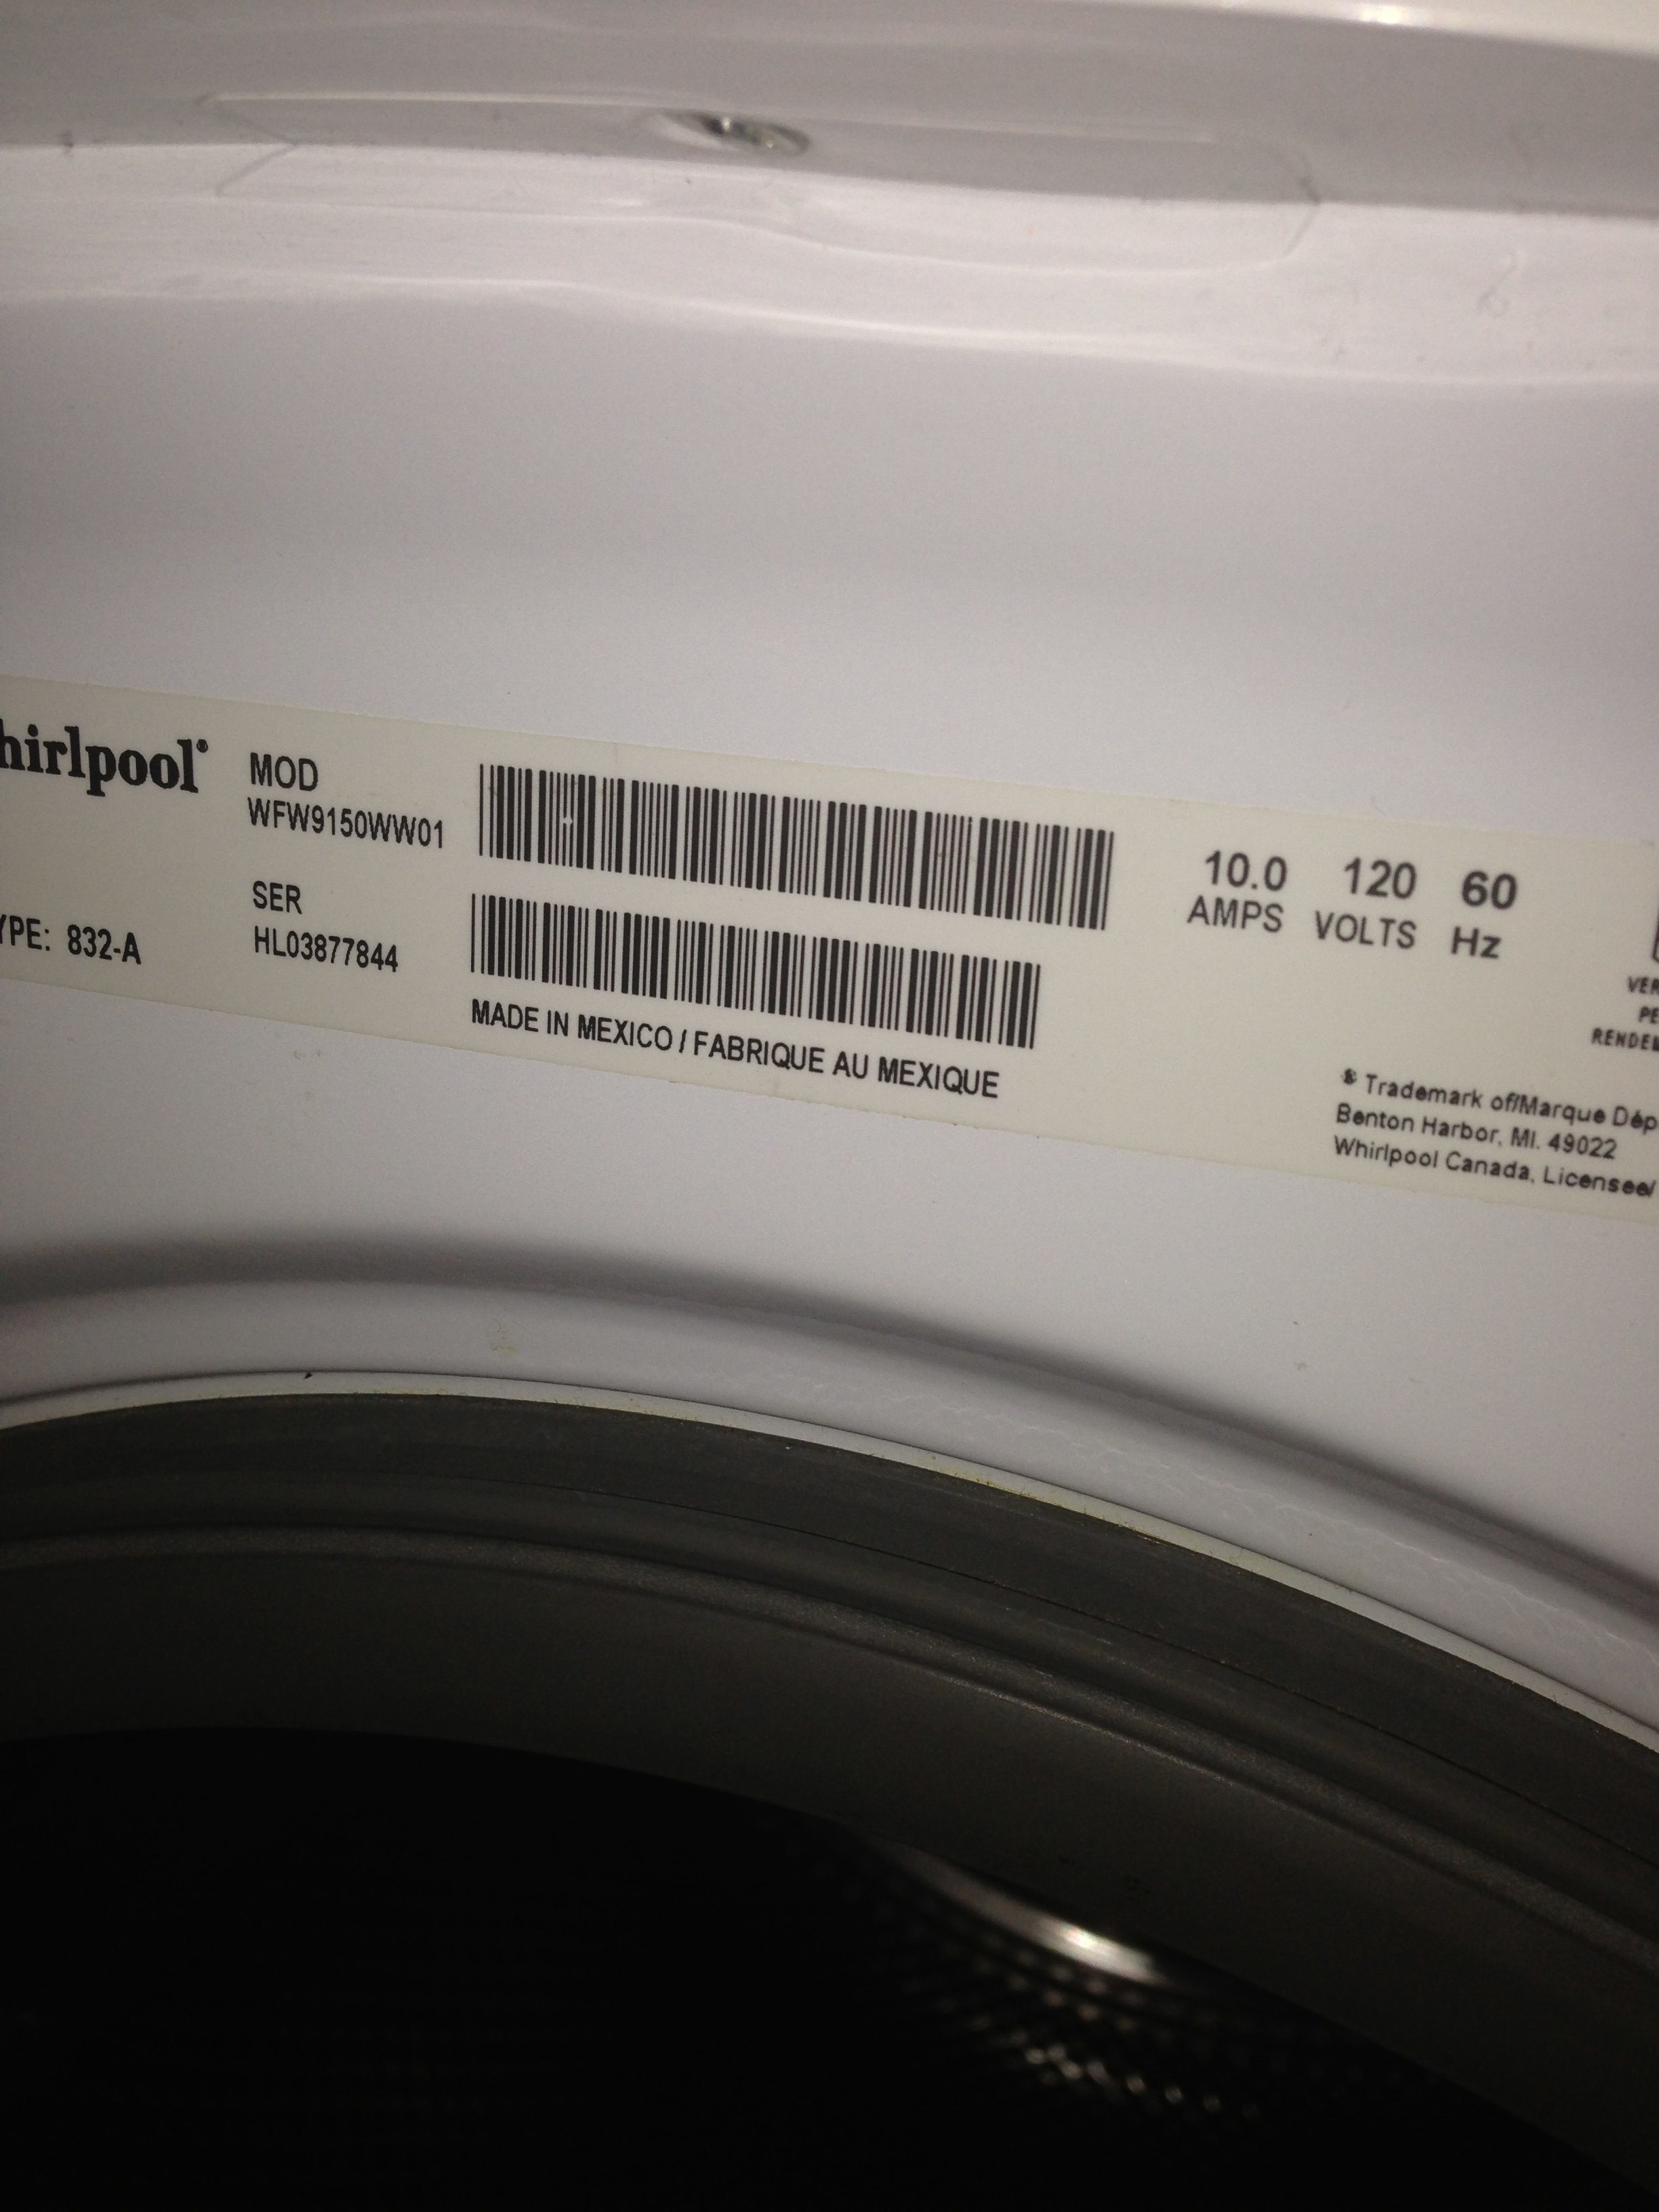 What are some common Whirlpool Cabrio washer problems according to reviews?